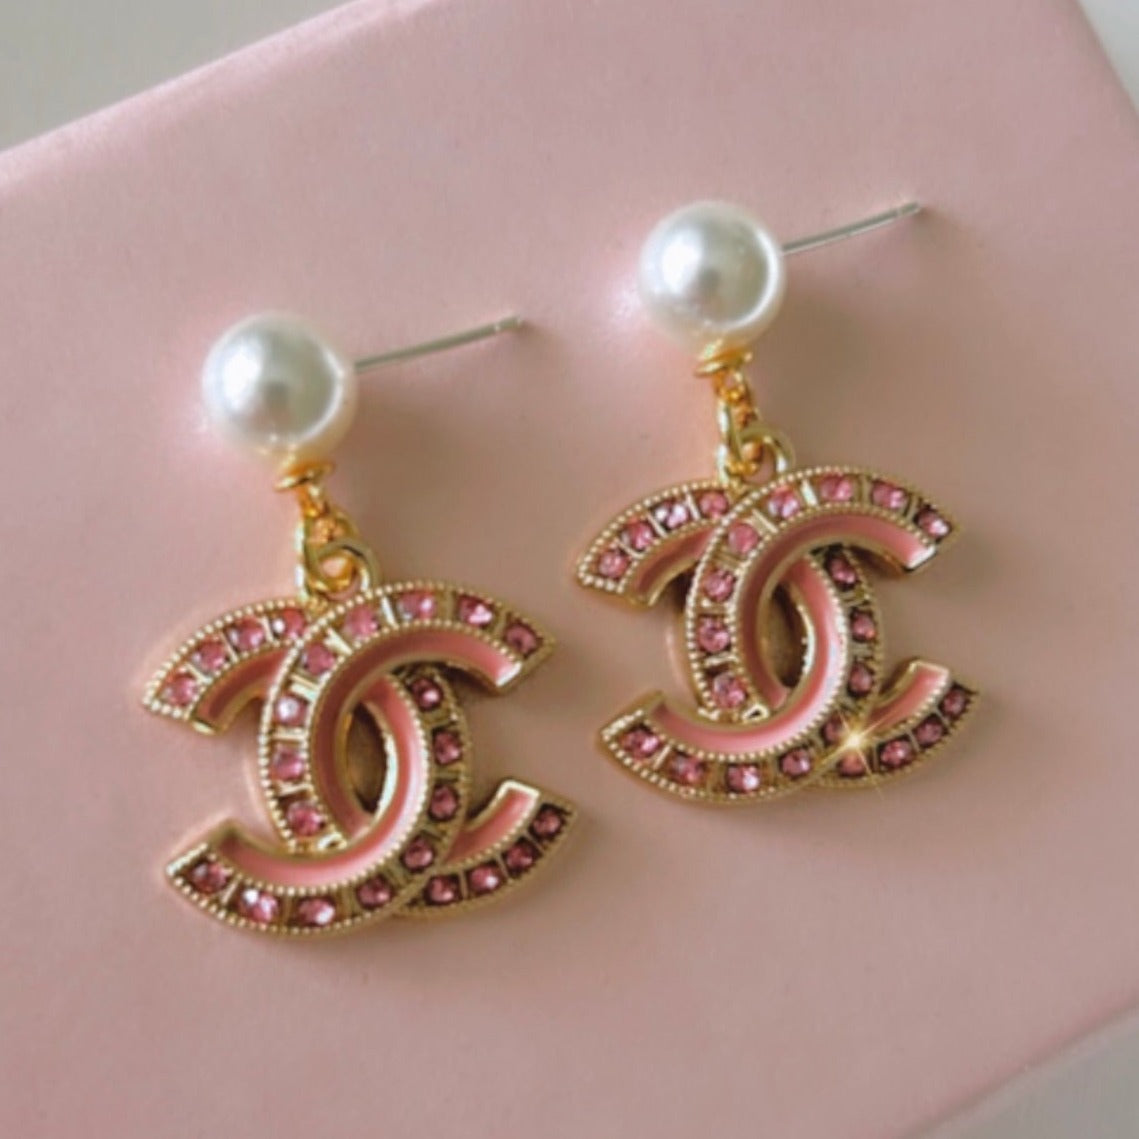 The Light Pink Crystal Earrings